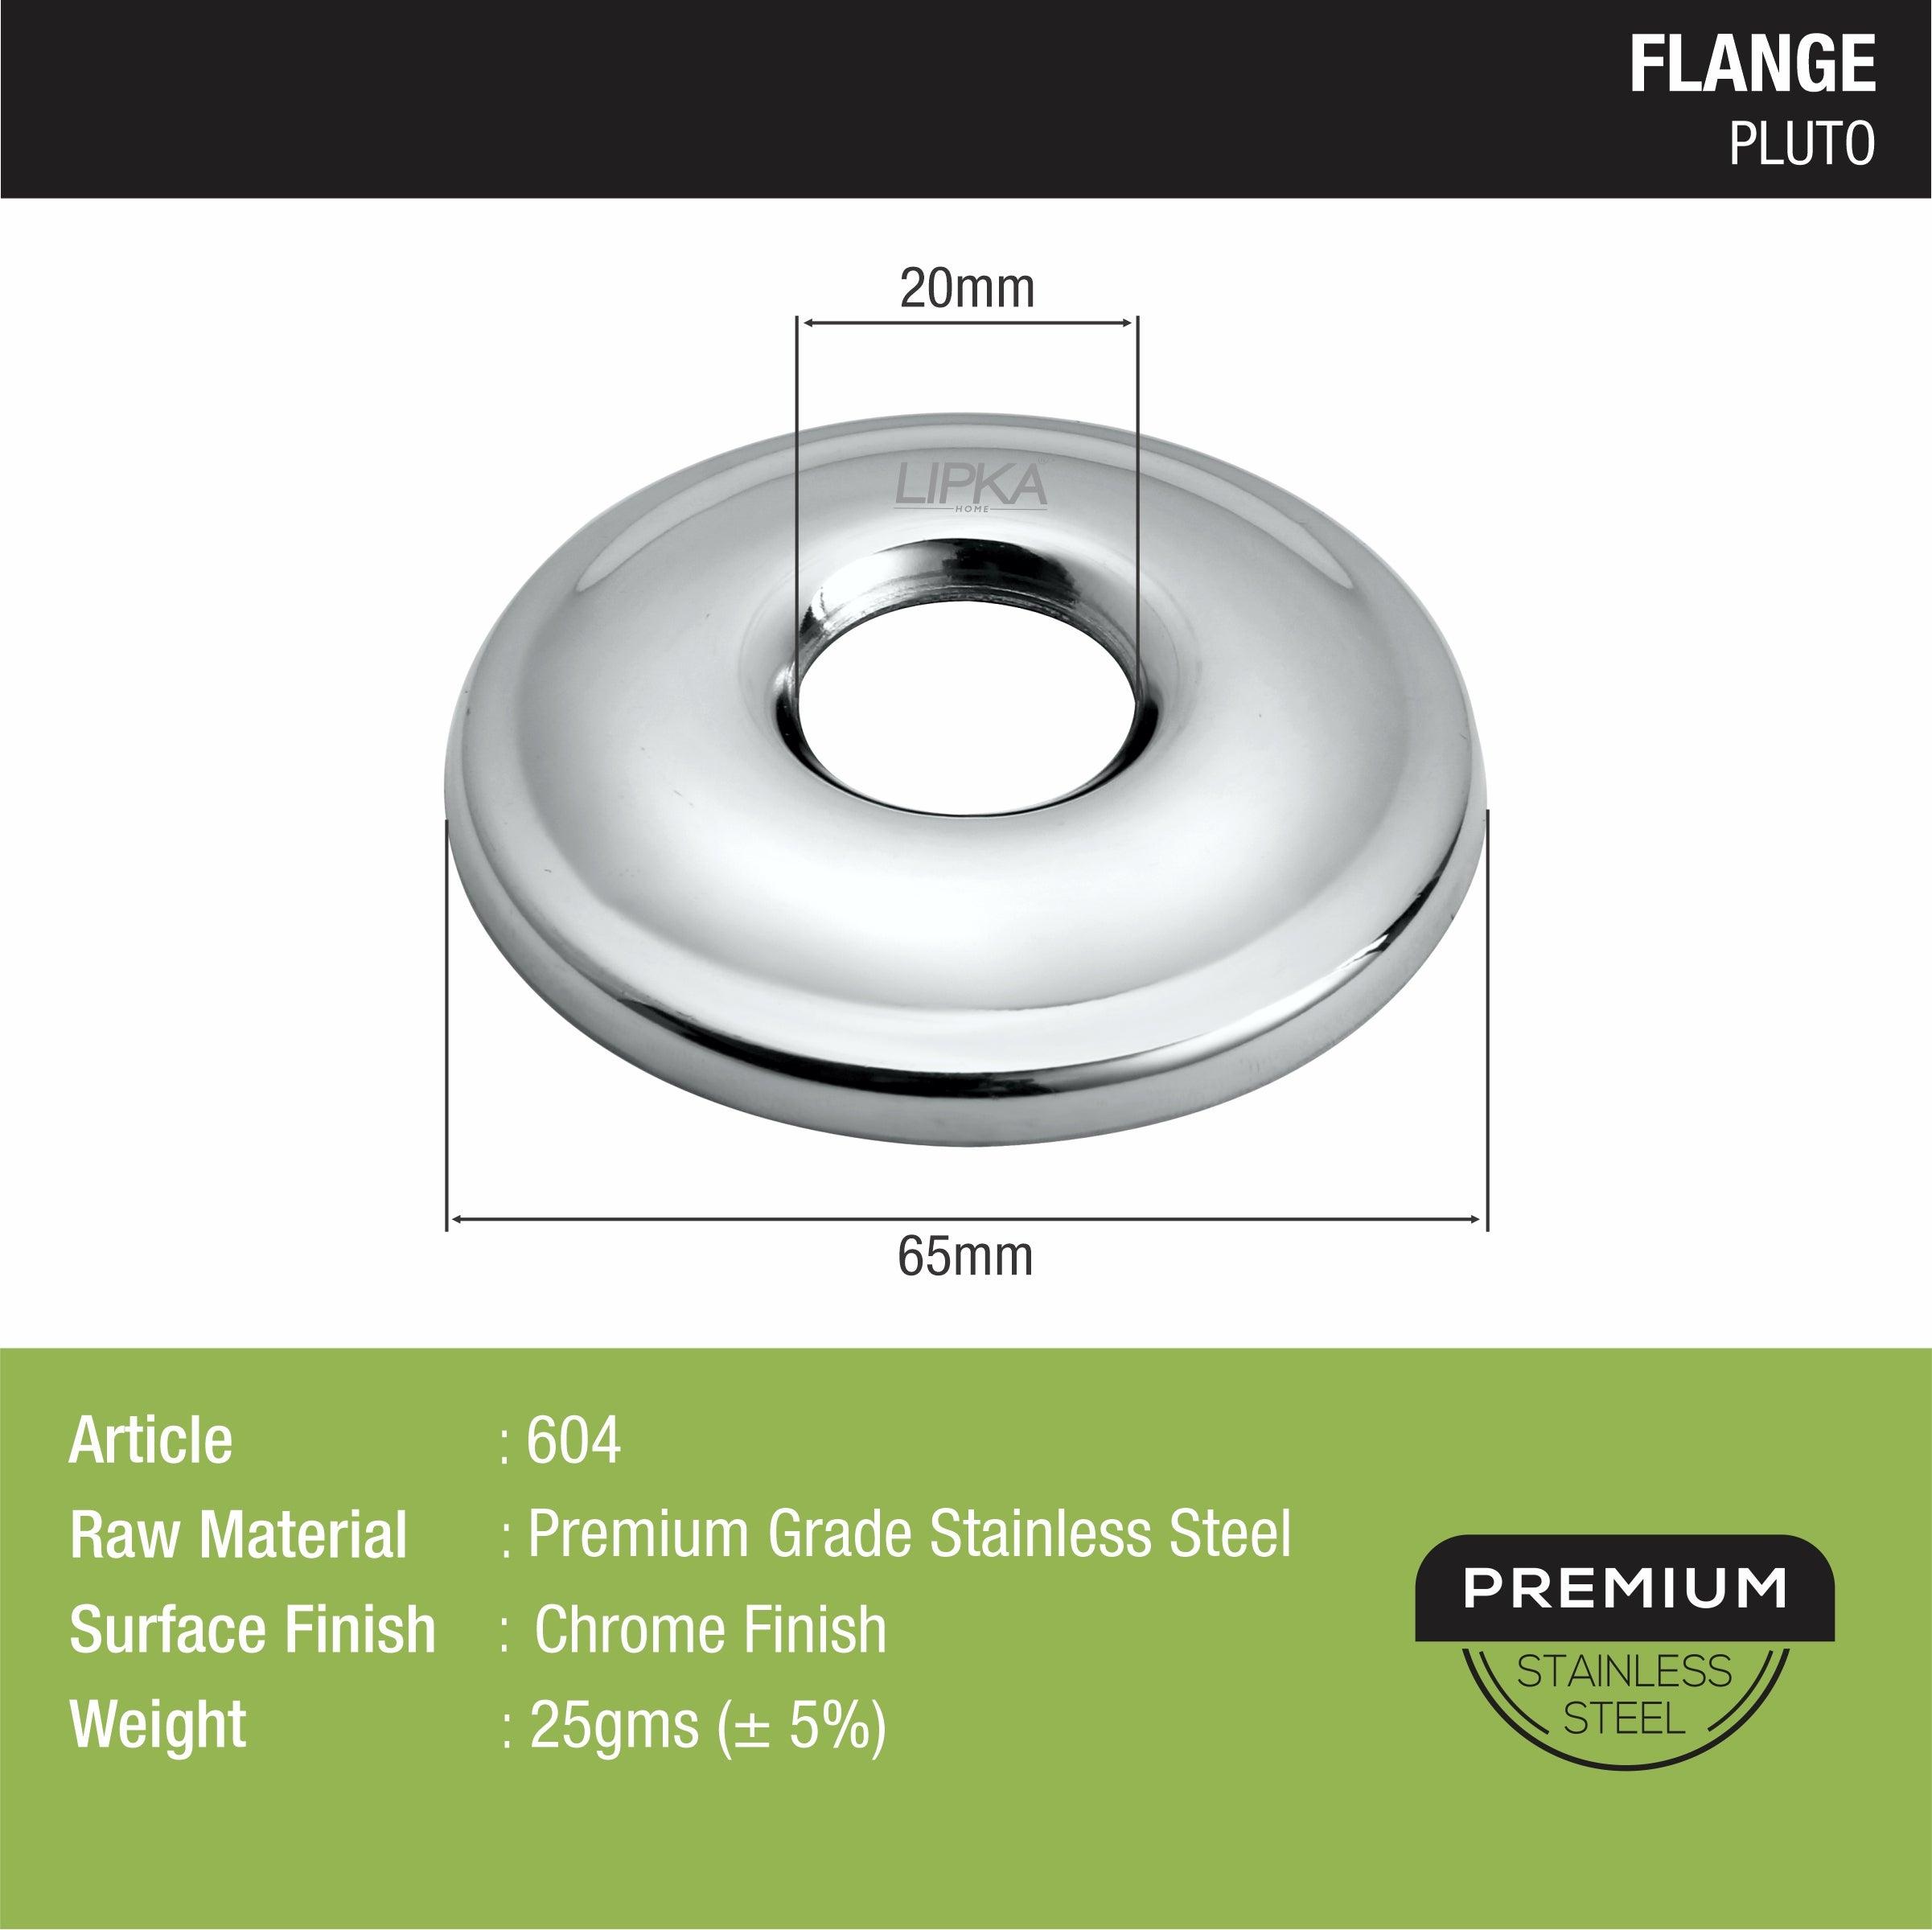 Pluto Flange sizes and dimensions